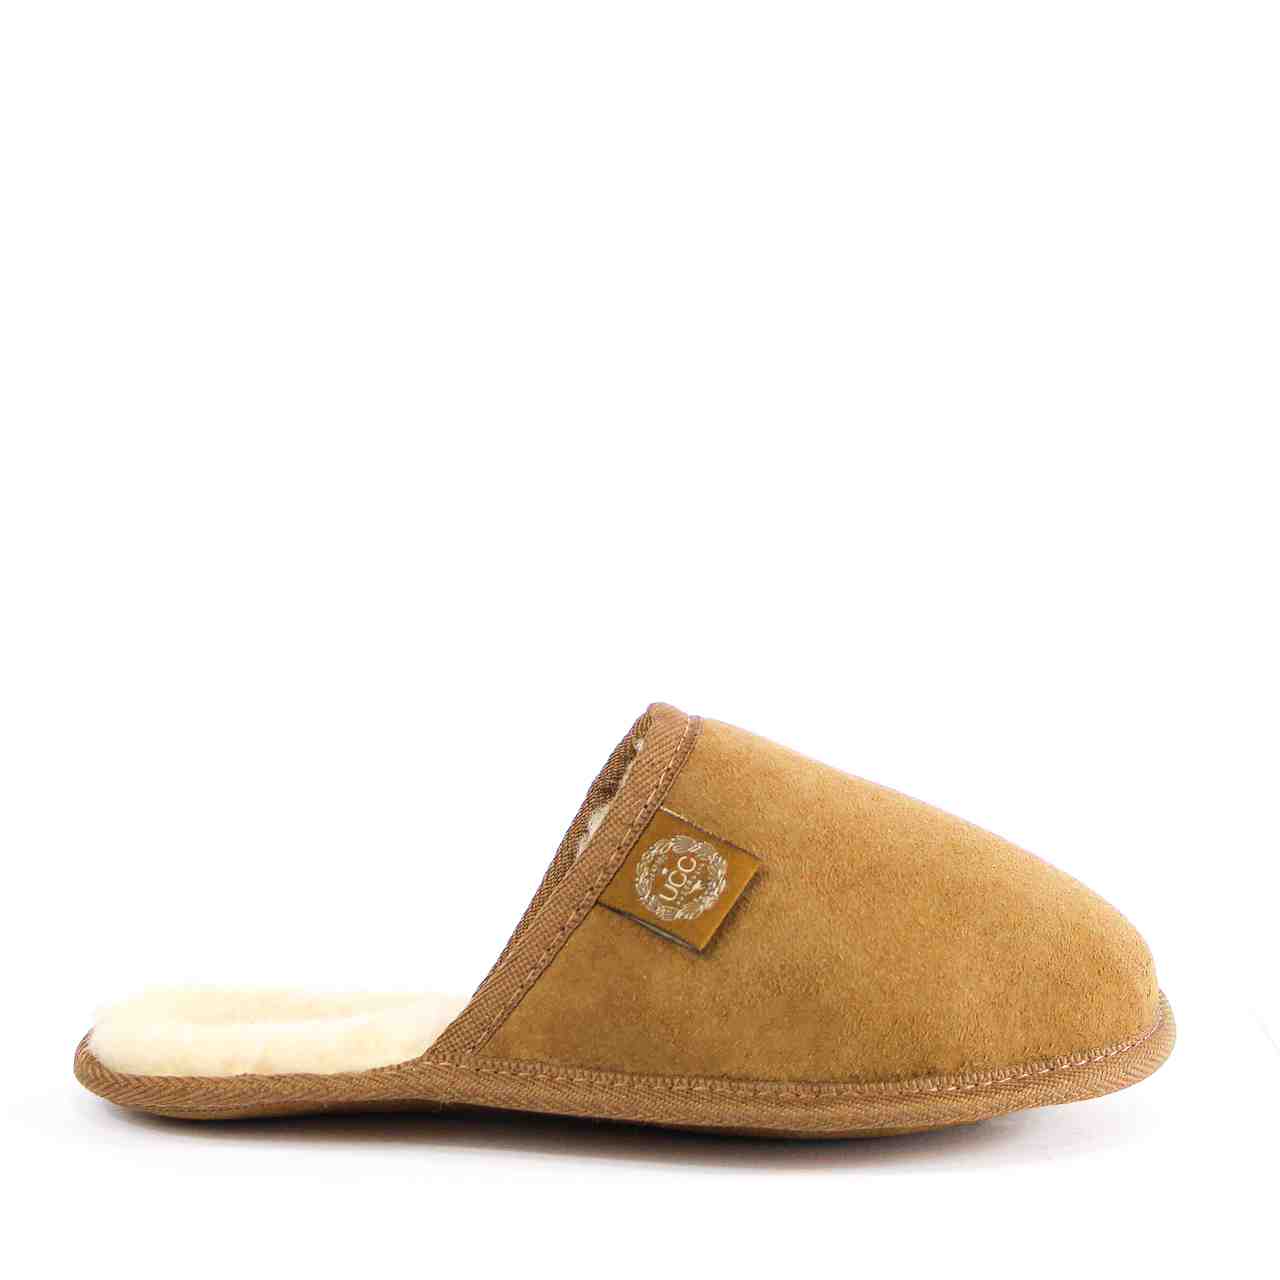 Ultimate Soft Sole Slippers - The Sheepskin Factory